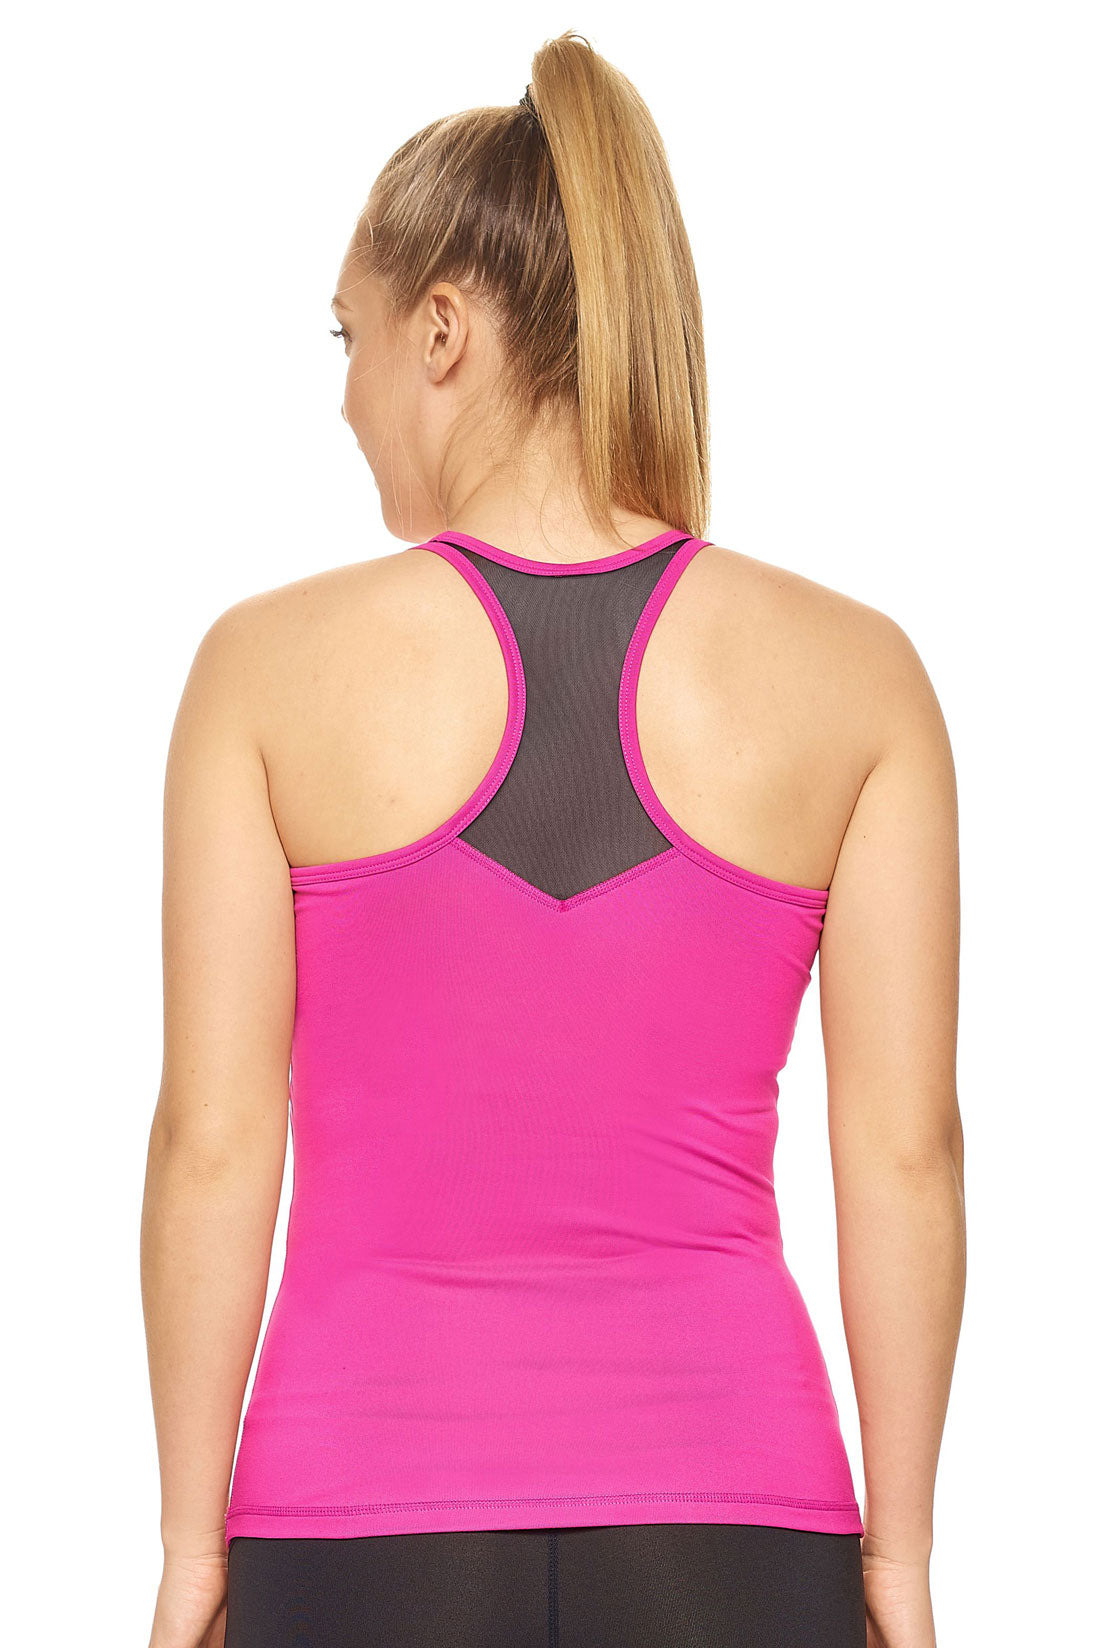 Expert Brand Wholesale Women's Mesh Panel Racerback Tank Airstretch Berry Pink image 3#berry